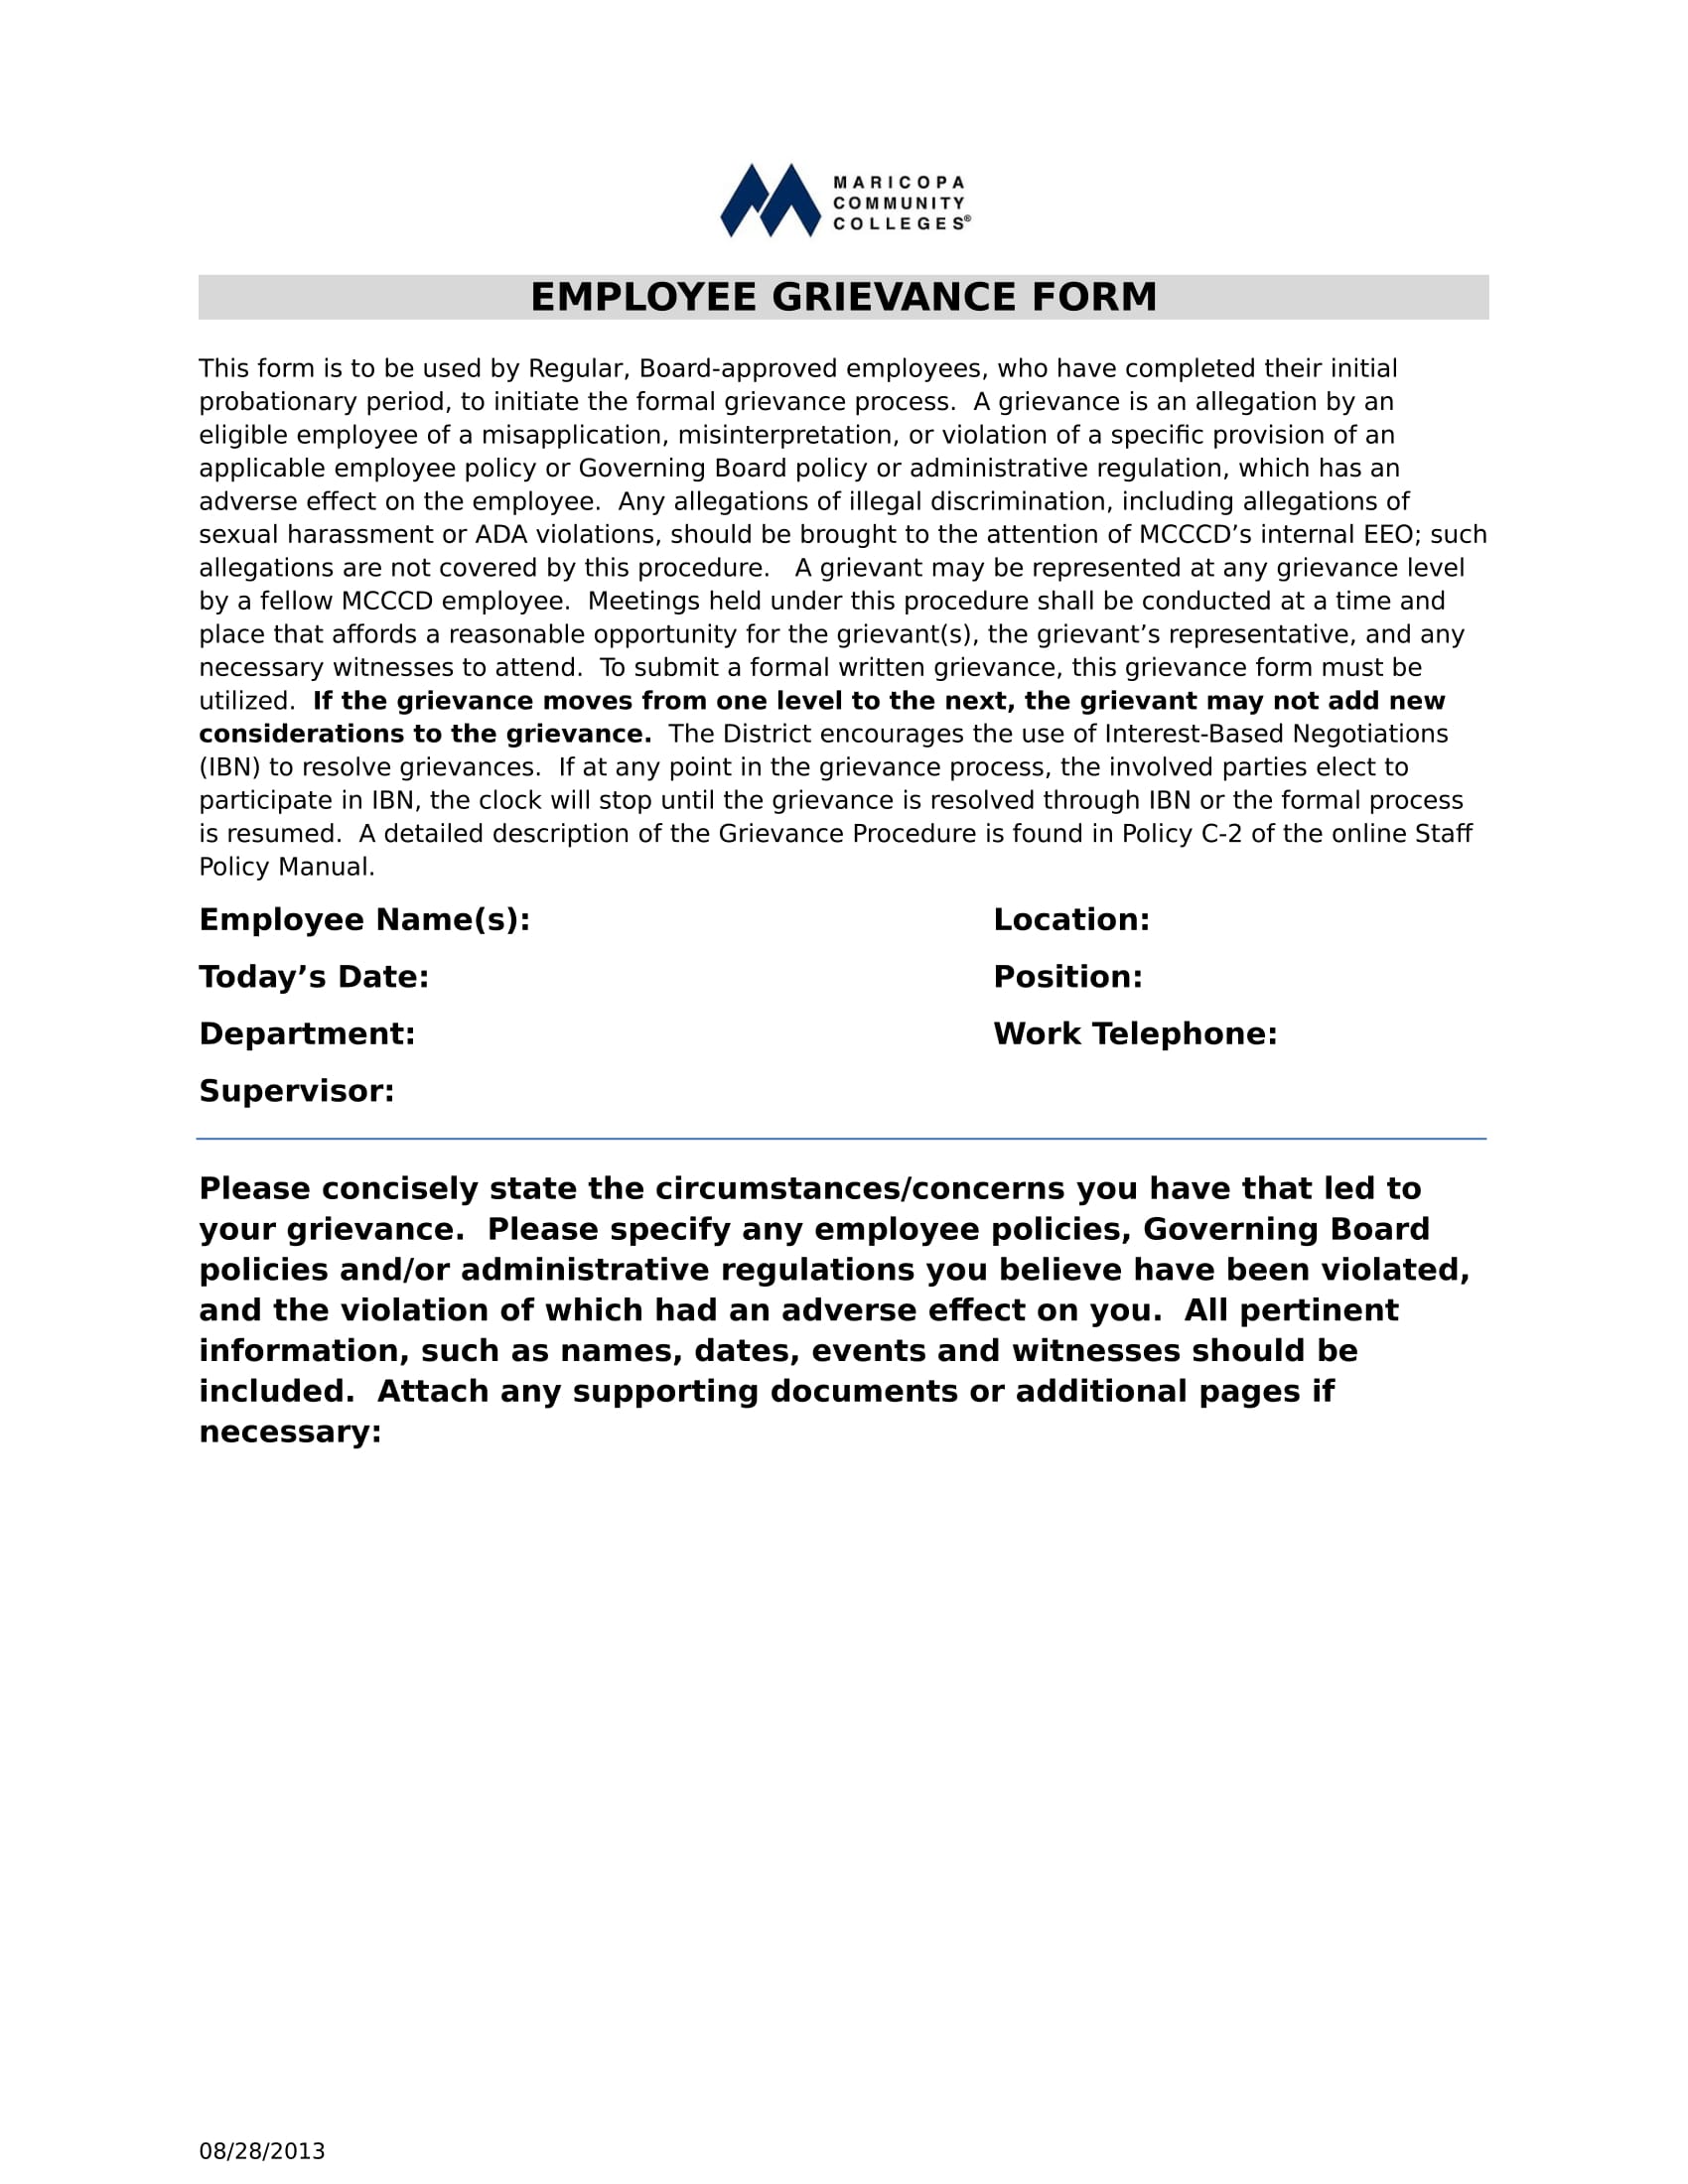 employee grievance form in doc 1